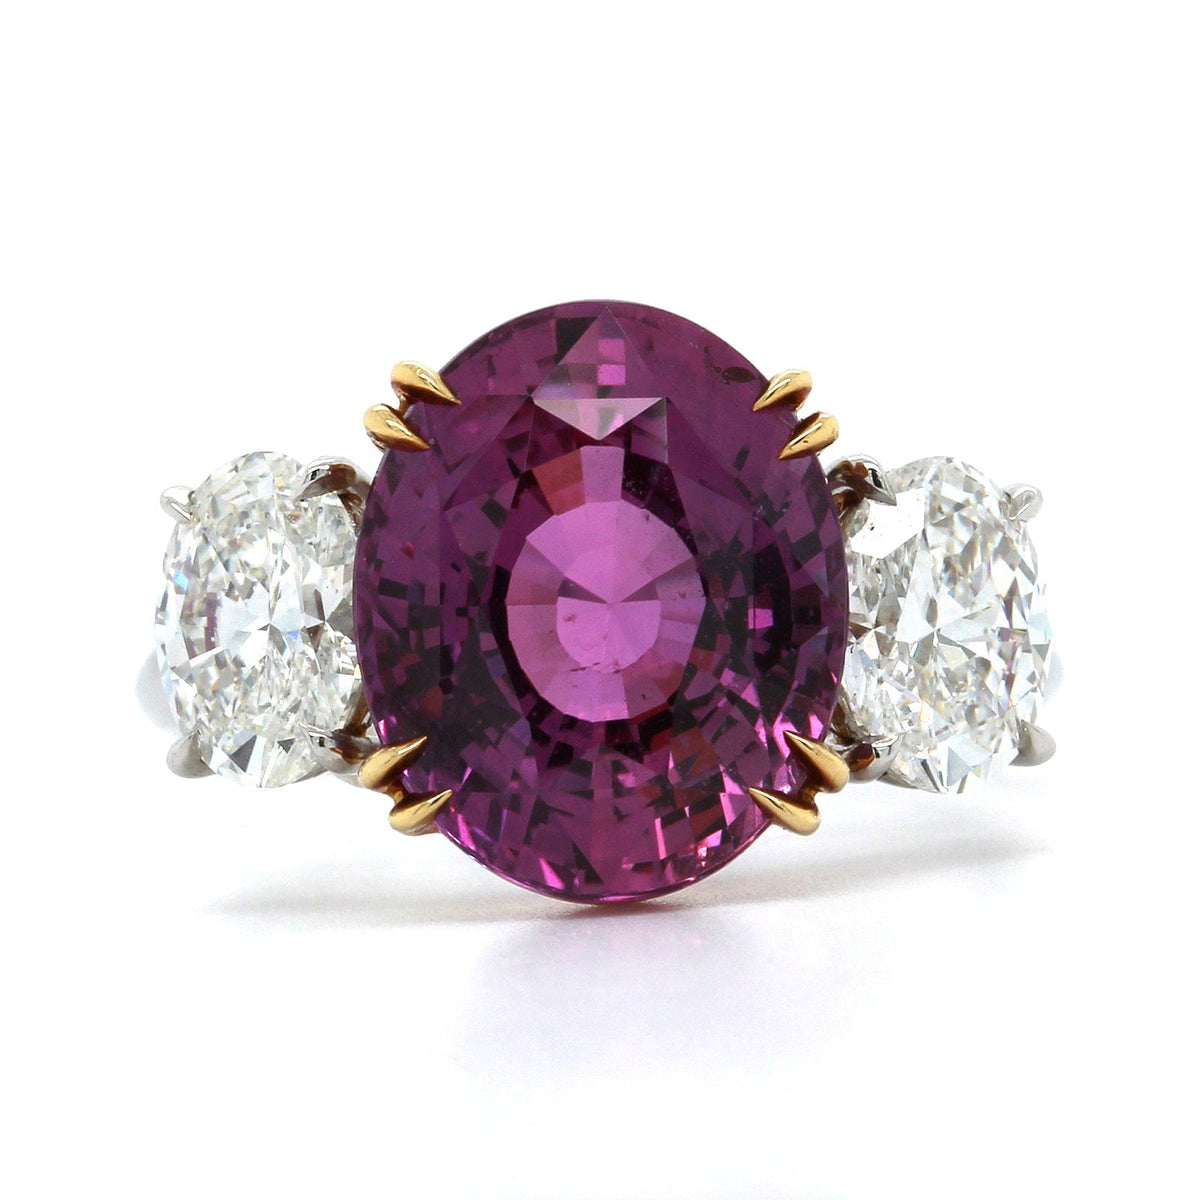 Platinum Oval Pink Sapphire and Diamond 3 Stone Ring, Platinum and 18k yellow gold, Long's Jewelers